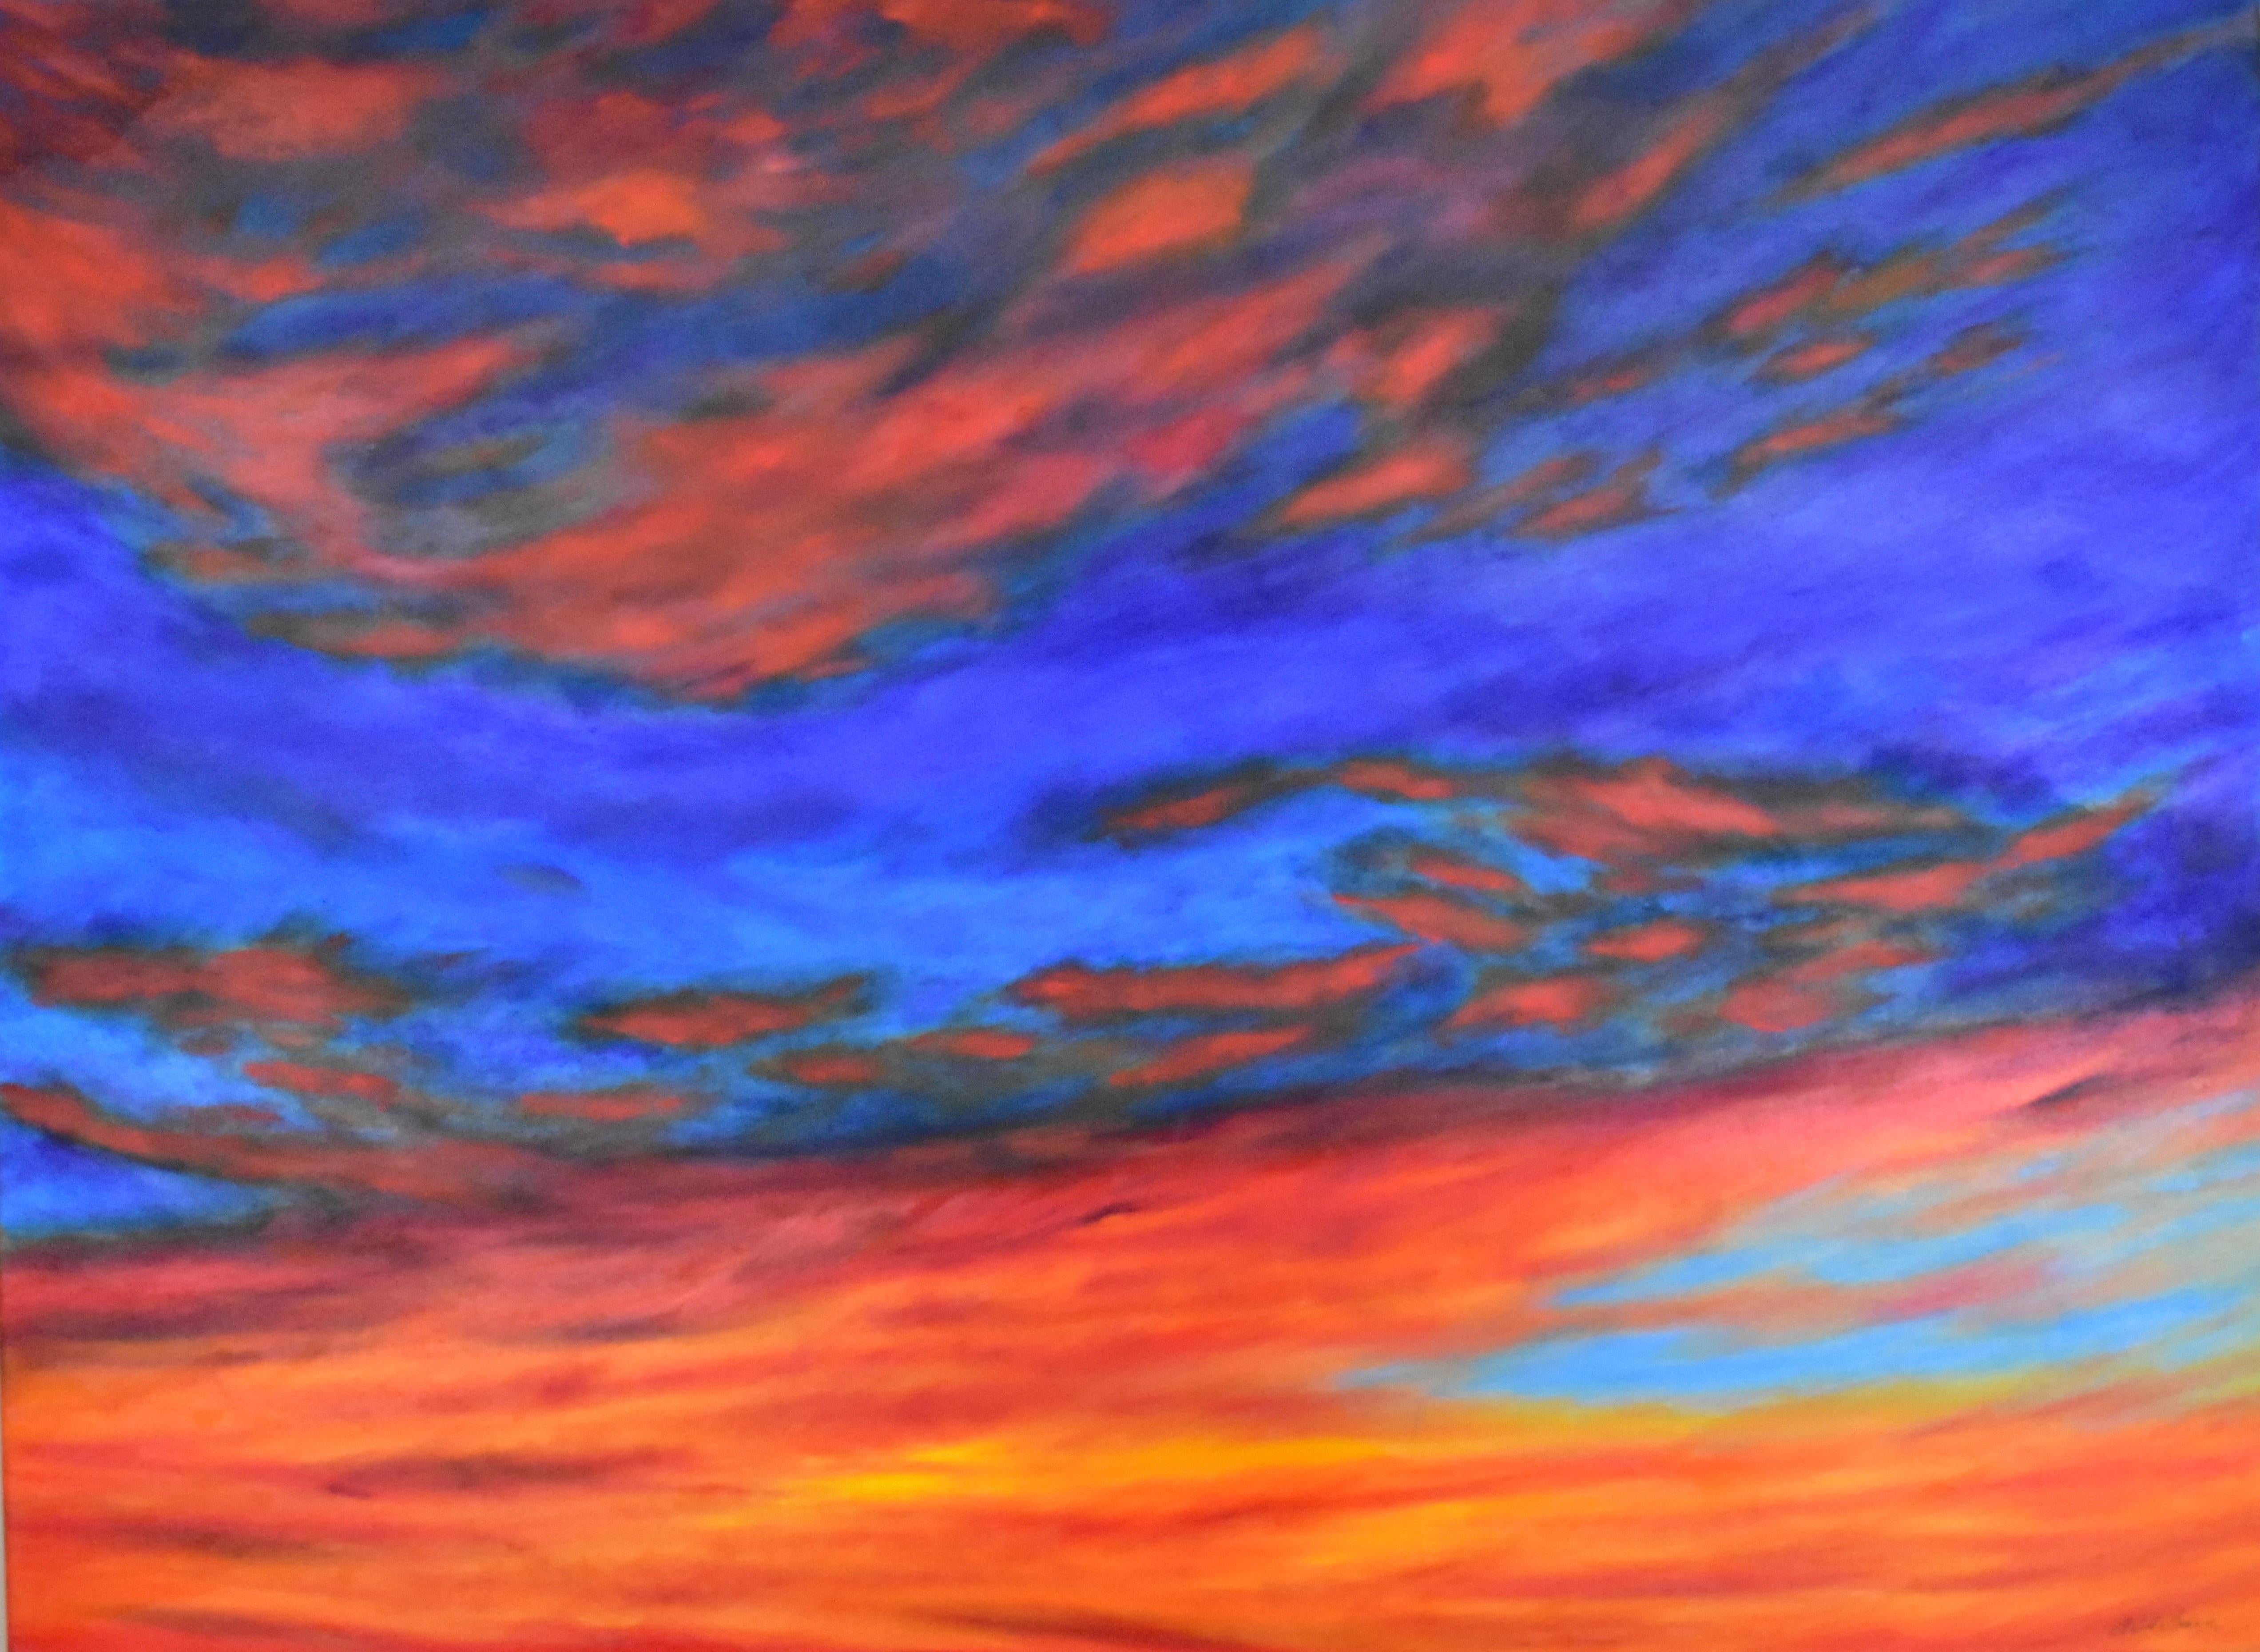 Sunset Vibrance  - Painting by Anil Sawe